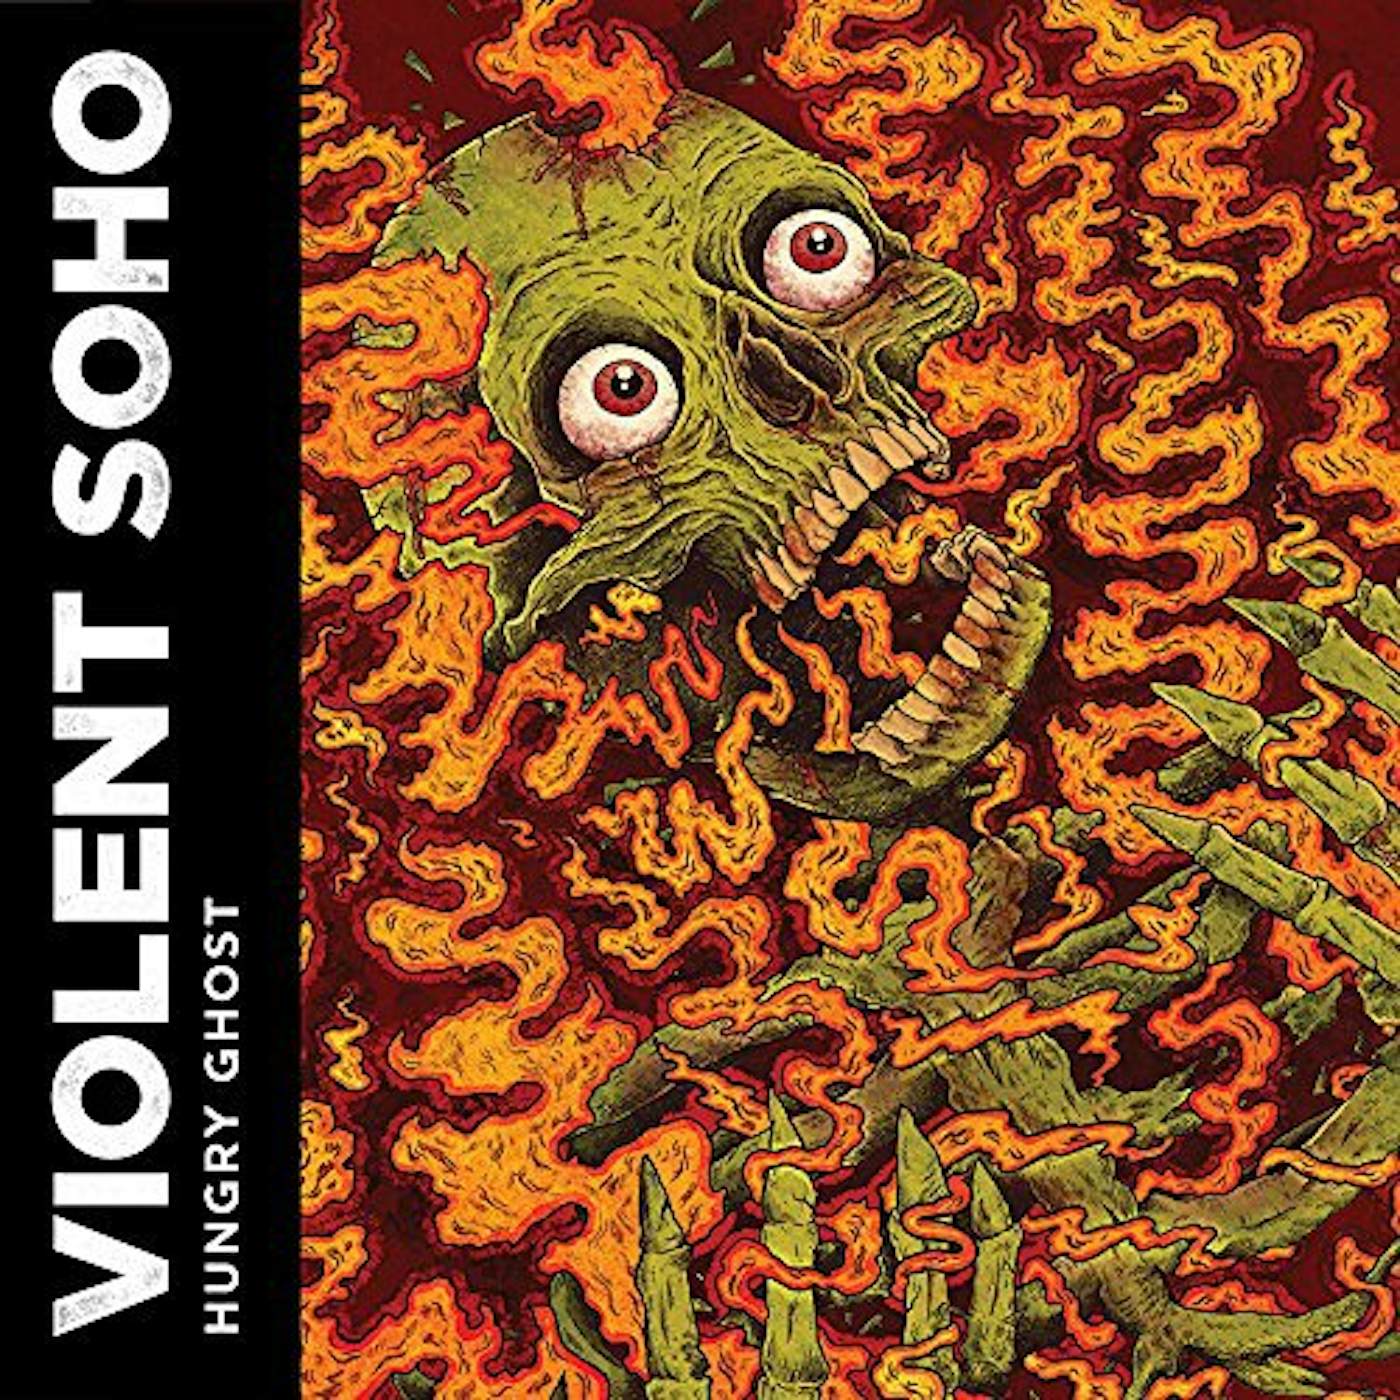 Violent Soho Hungry Ghost Vinyl Record